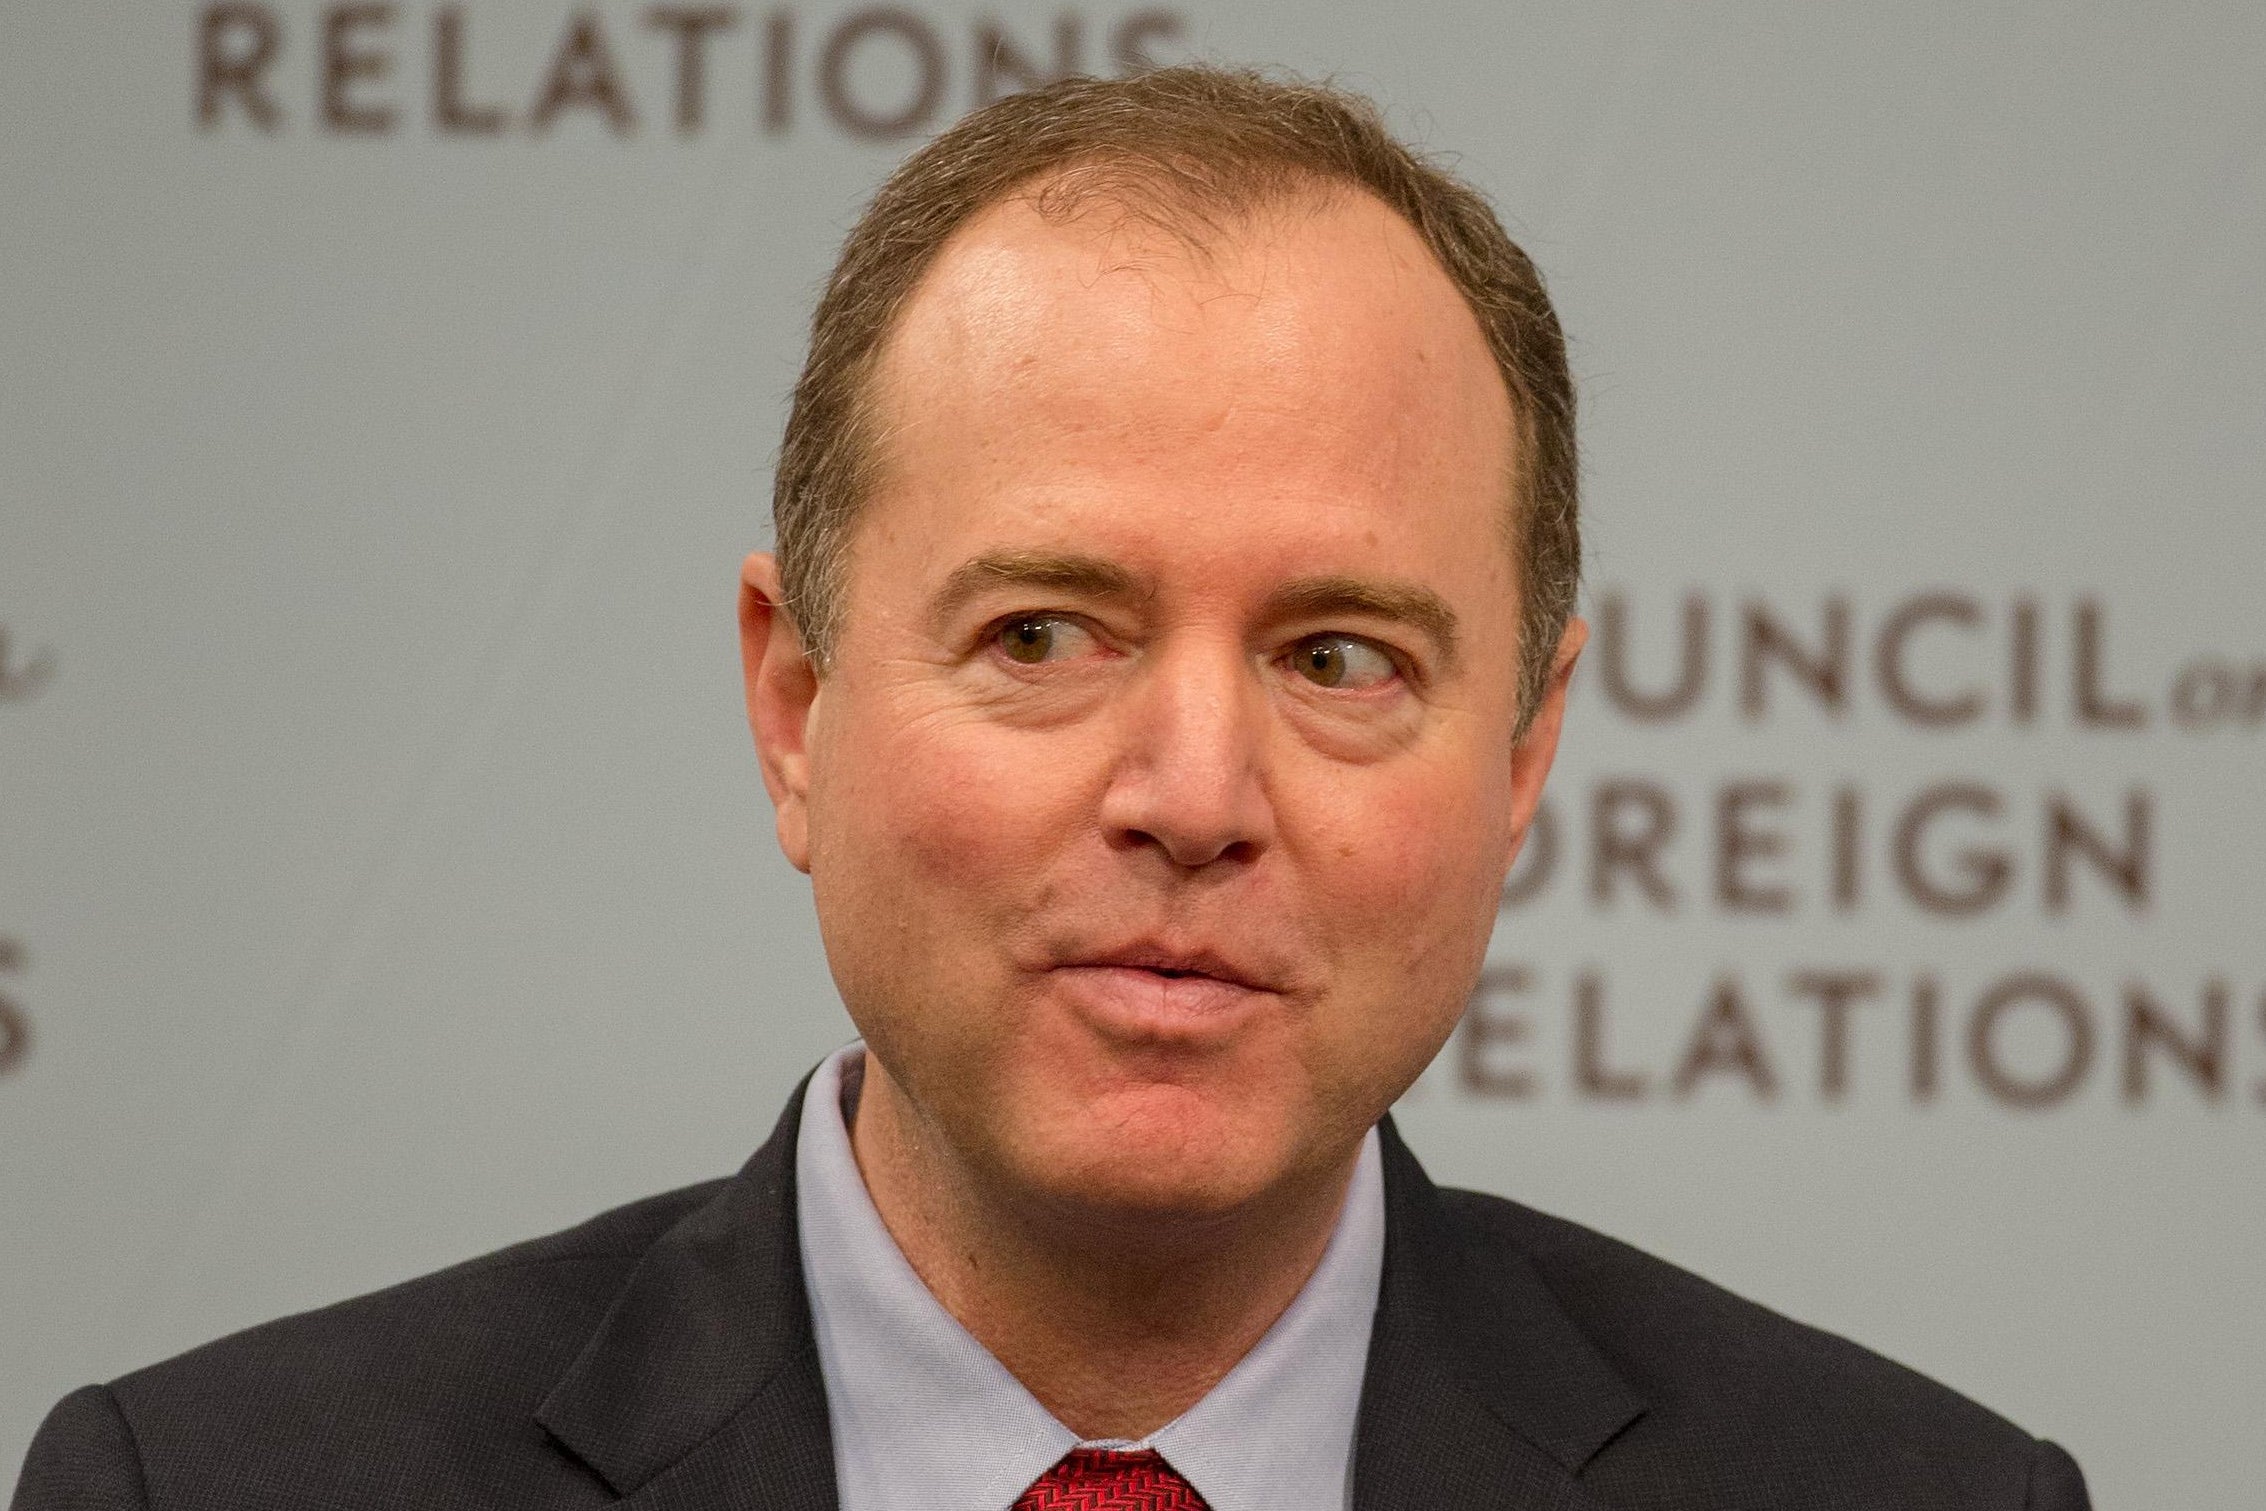 WASHINGTON, DC - FEBRUARY 16:  House Intelligence Ranking Member Adam Schiff (D-CA) speaks at the Council On Foreign Relations with Andrea Mitchell, Chief Foreign Affairs Correspondent at NBC News on February 16, 2018 in Washington, DC.  (Photo by Tasos Katopodis/Getty Images)